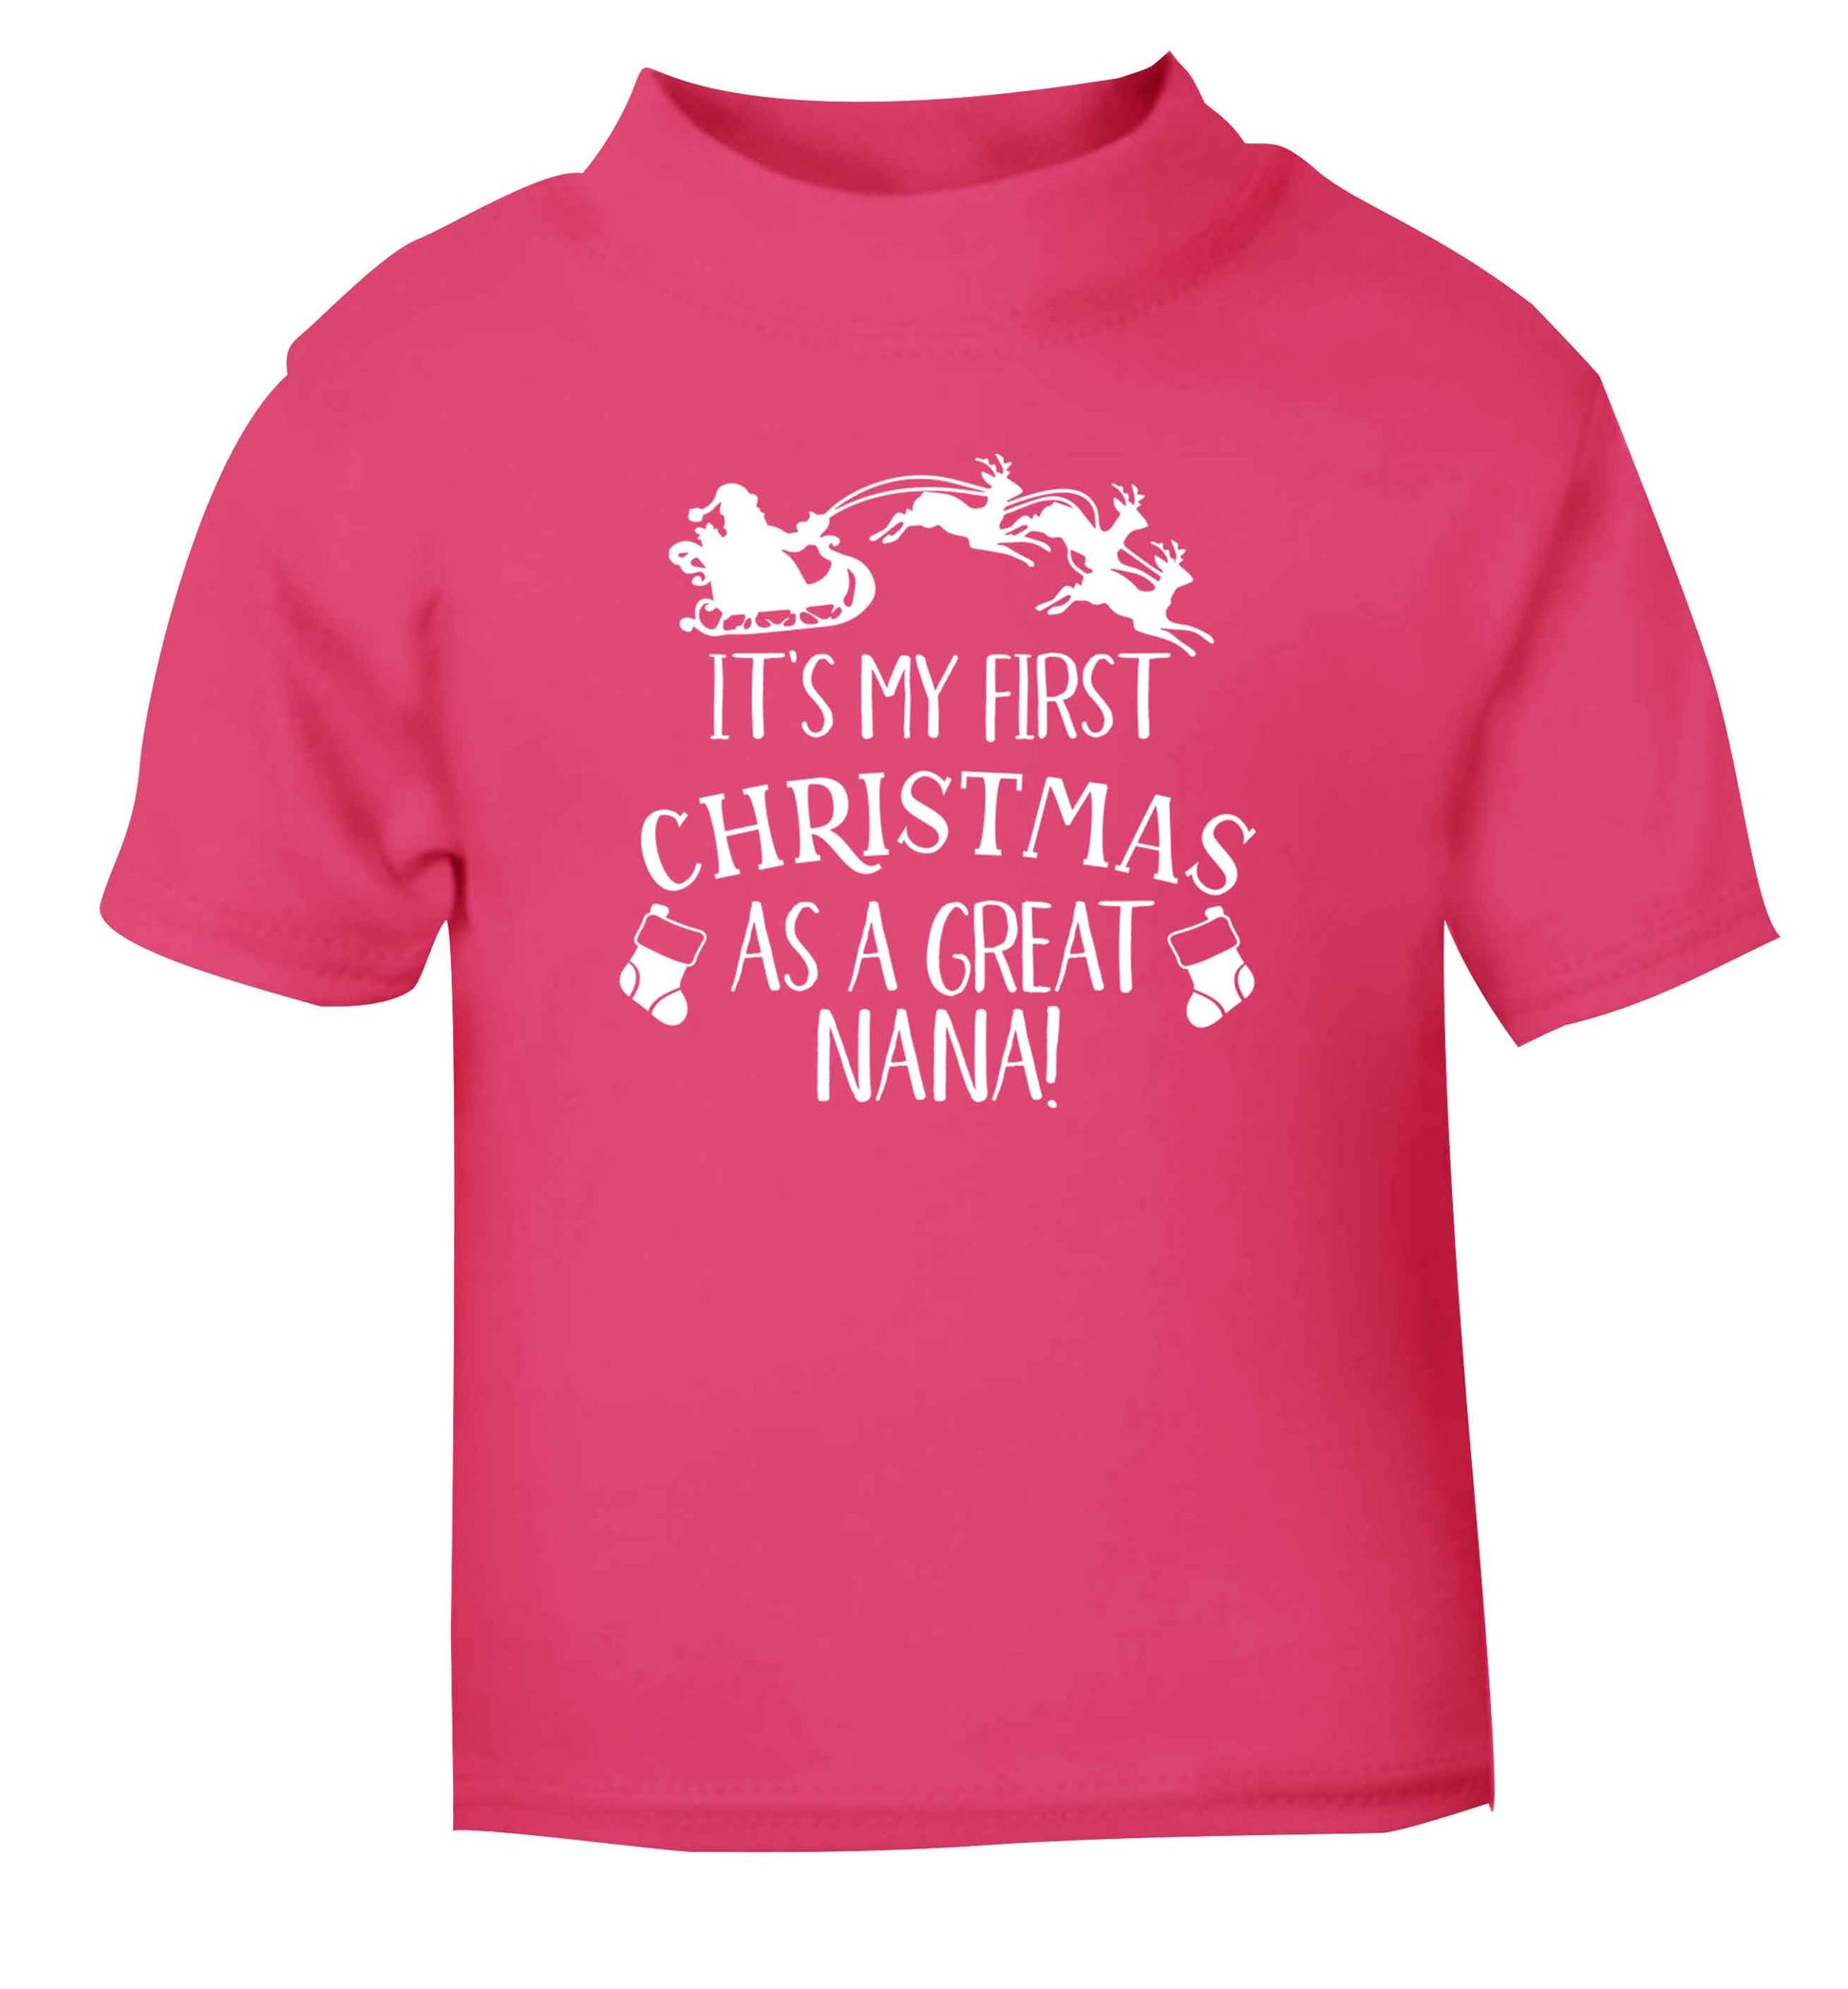 It's my first Christmas as a great nana! pink Baby Toddler Tshirt 2 Years